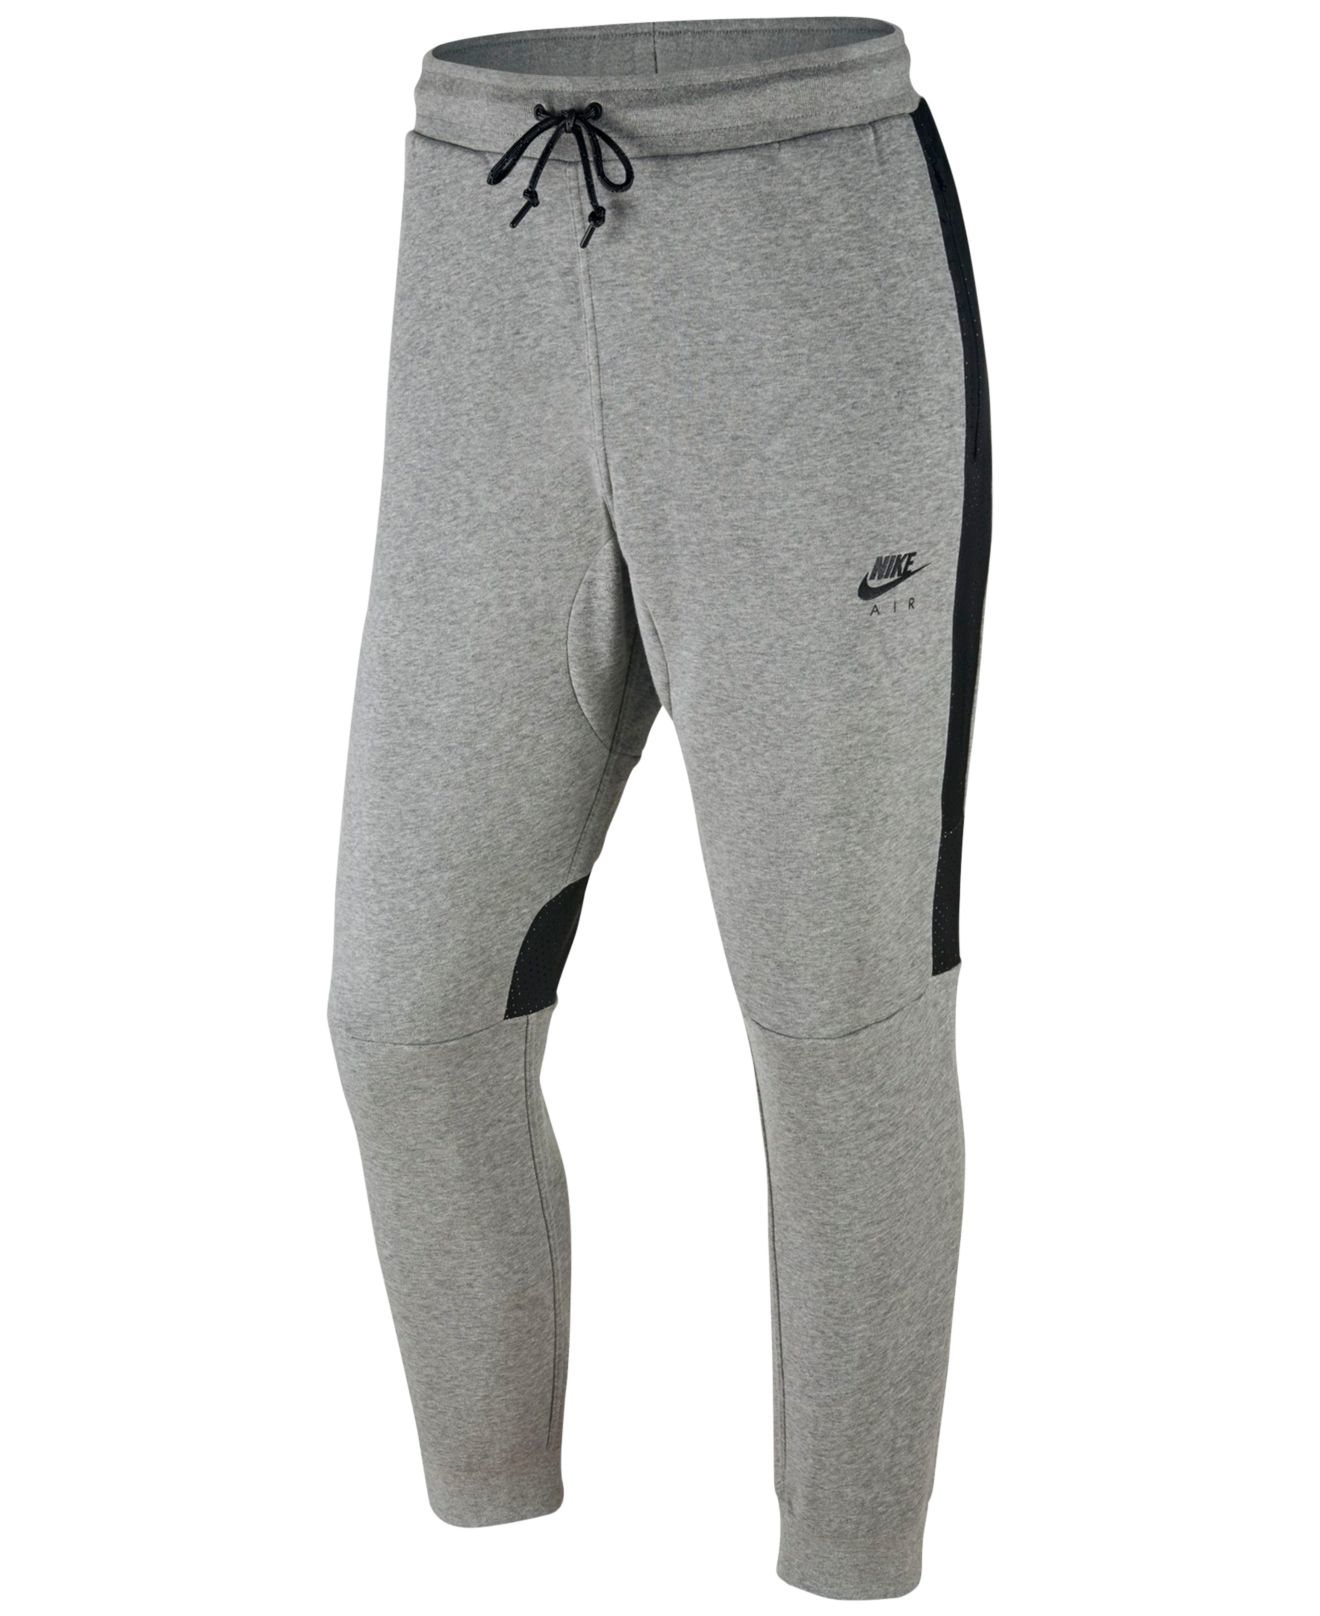 grey and black nike joggers